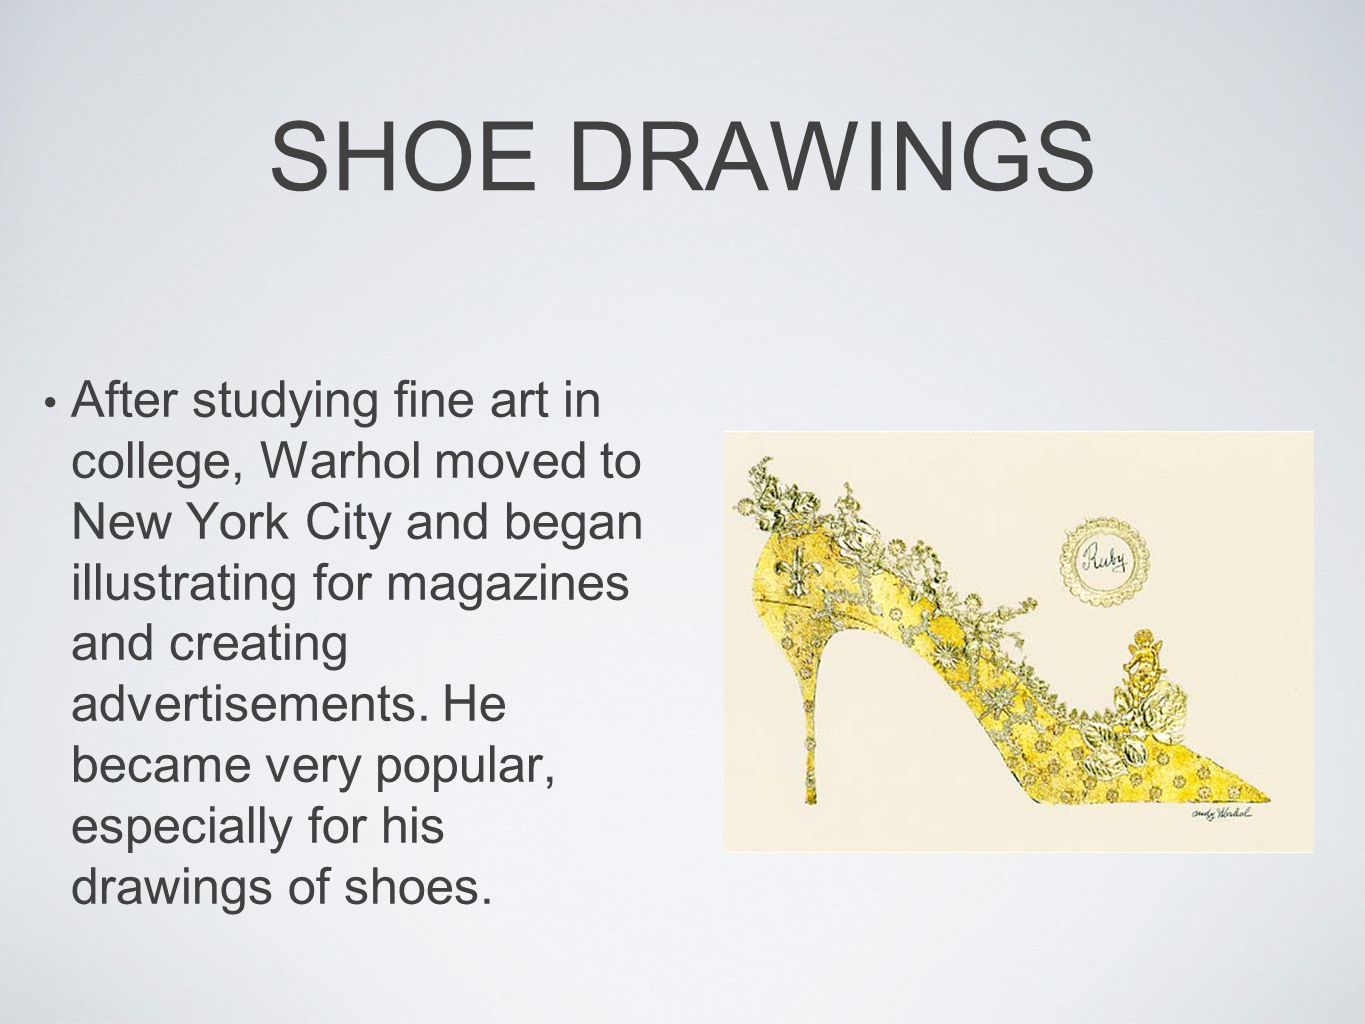 SHOE DRAWINGS After studying fine art in college, Warhol moved to New York City and began illustrating for magazines and creating advertisements.